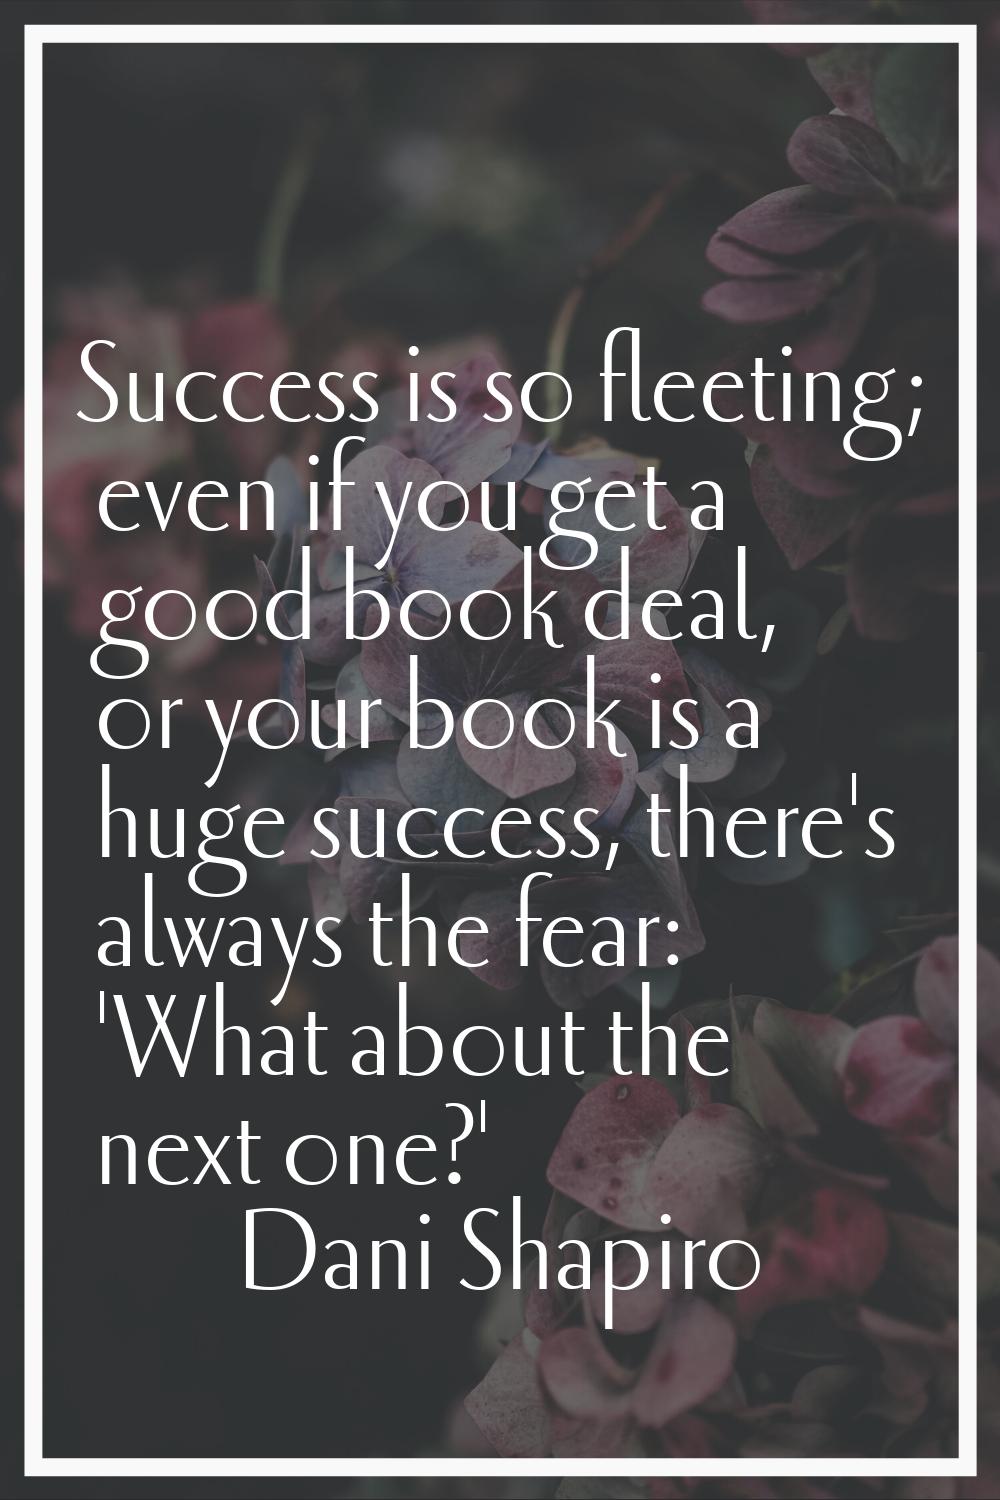 Success is so fleeting; even if you get a good book deal, or your book is a huge success, there's a